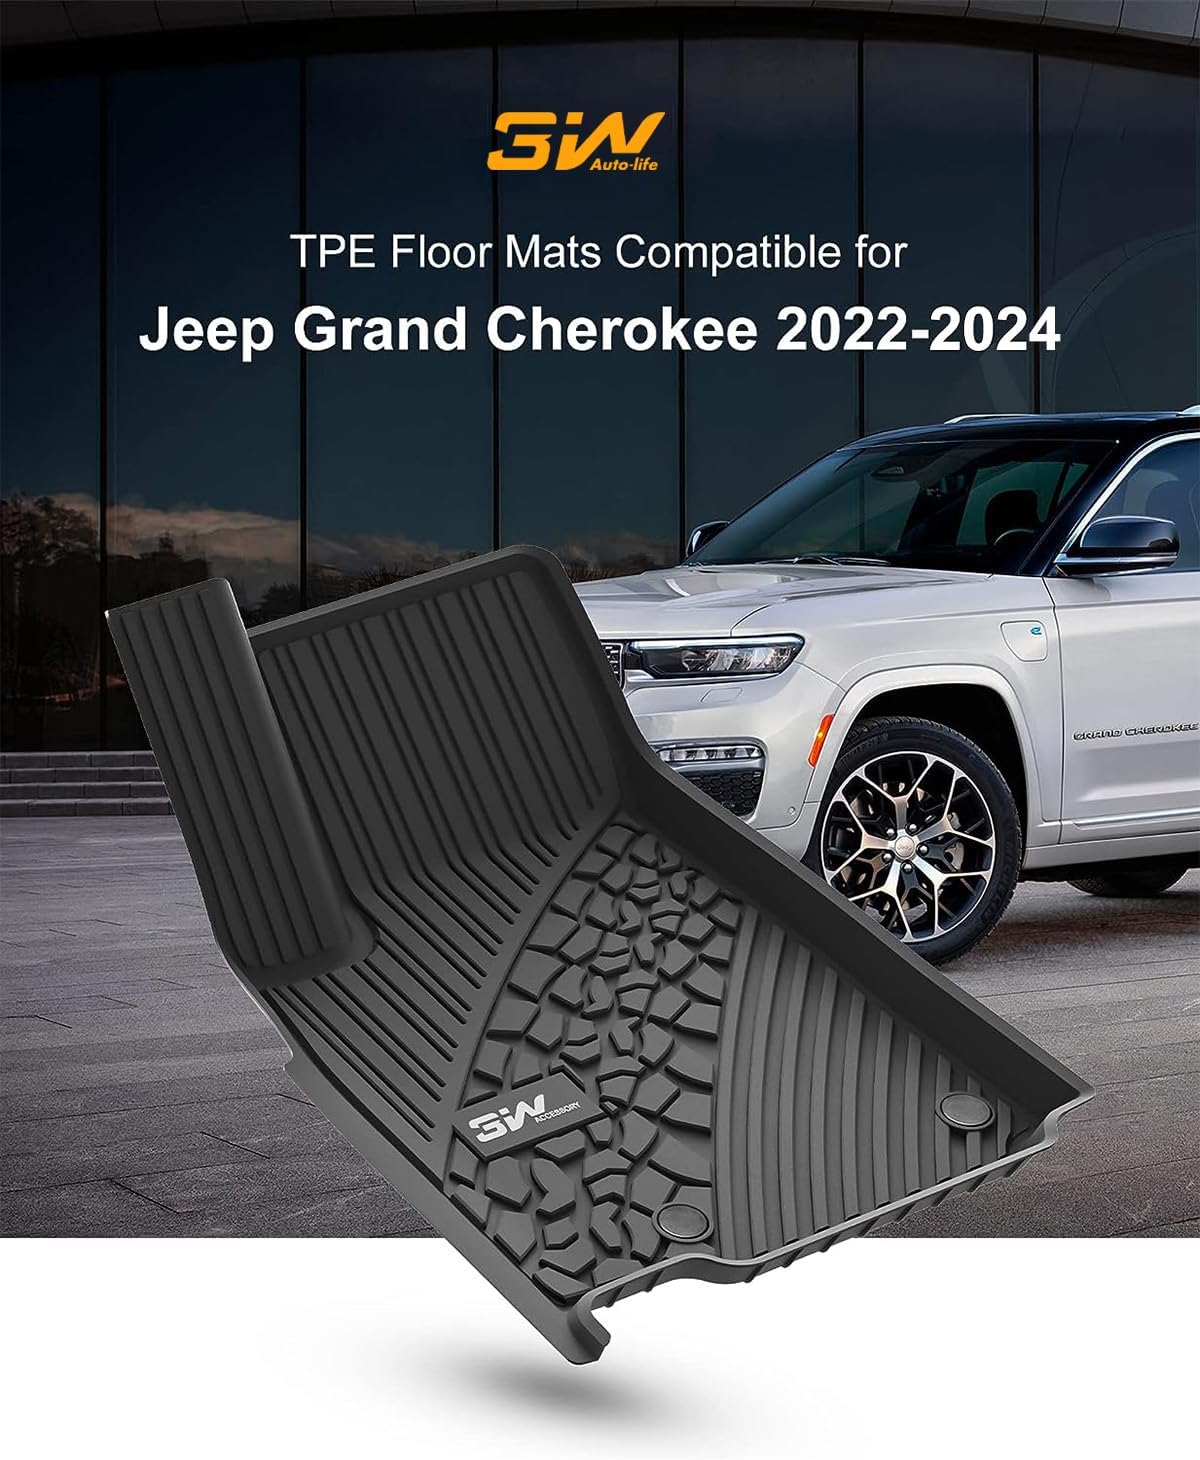 3W Floor Mats&amp;Cargo Liner Compatible for Jeep Grand Cherokee 2022-2024 TPE All Weather Custom Fit Floor Liner 1st 2nd Rows and Trunk Mat Full Set Car Mats, Black